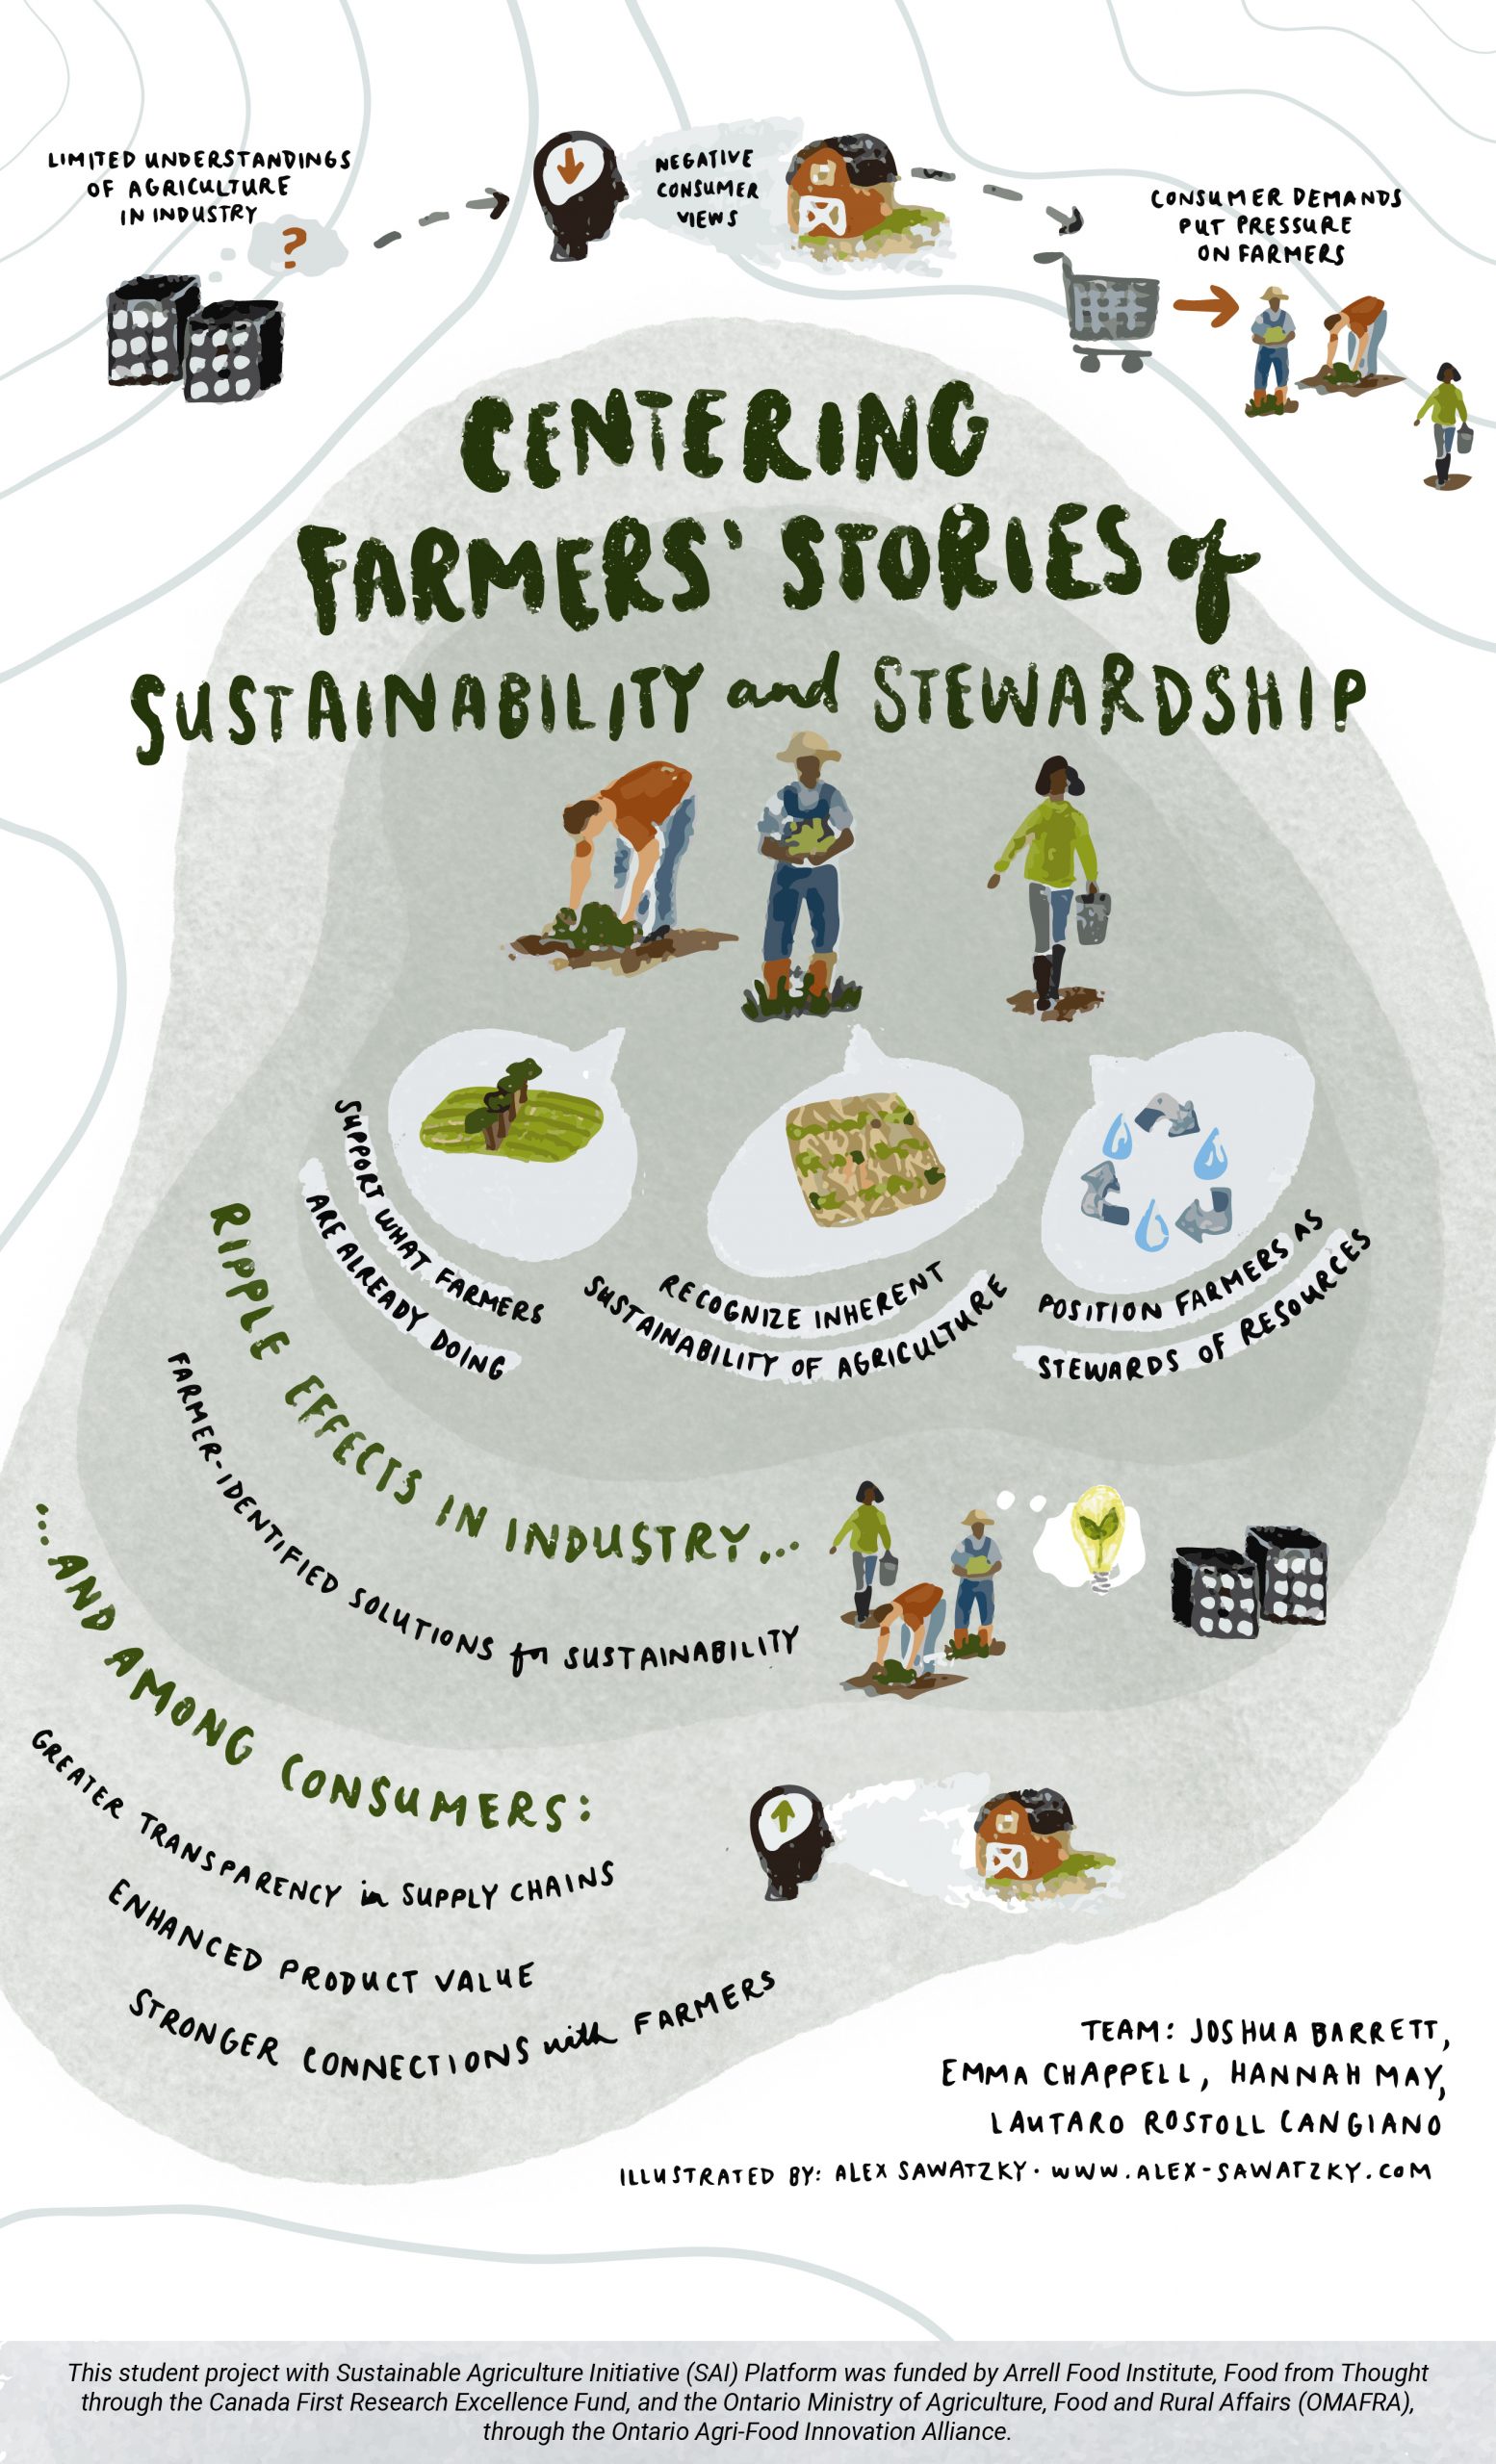 A student team working with SAI Platform conducted interviews with sustainability managers, farmers and other actors at every level of the supply chain to compile positive examples to showcase the capacity of farming to be part of the conducted.